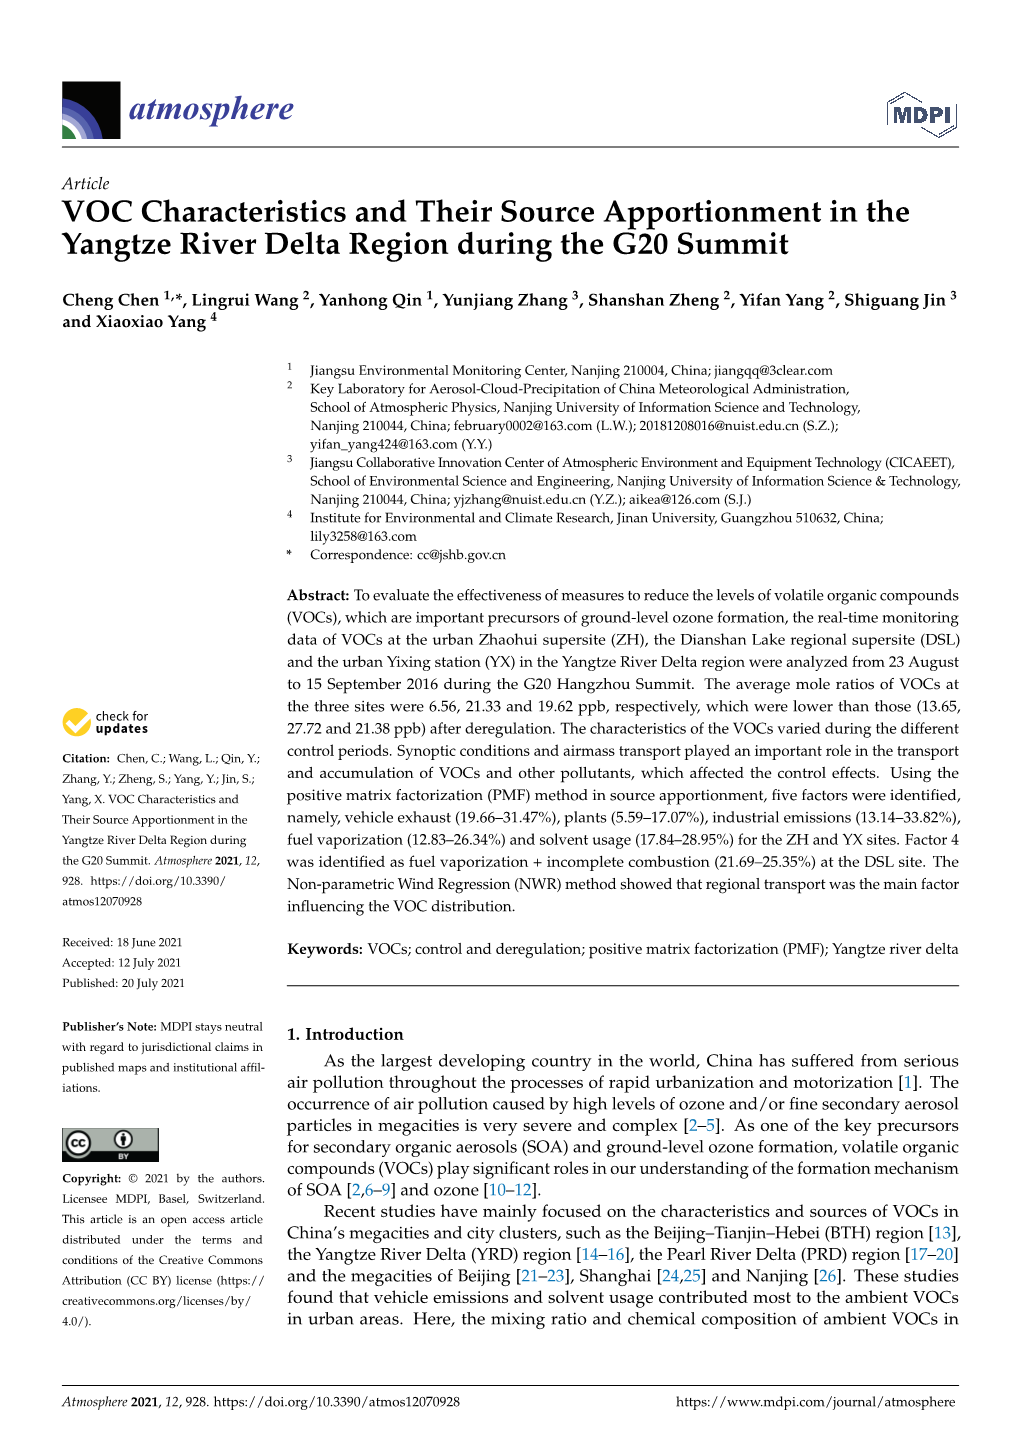 VOC Characteristics and Their Source Apportionment in the Yangtze River Delta Region During the G20 Summit